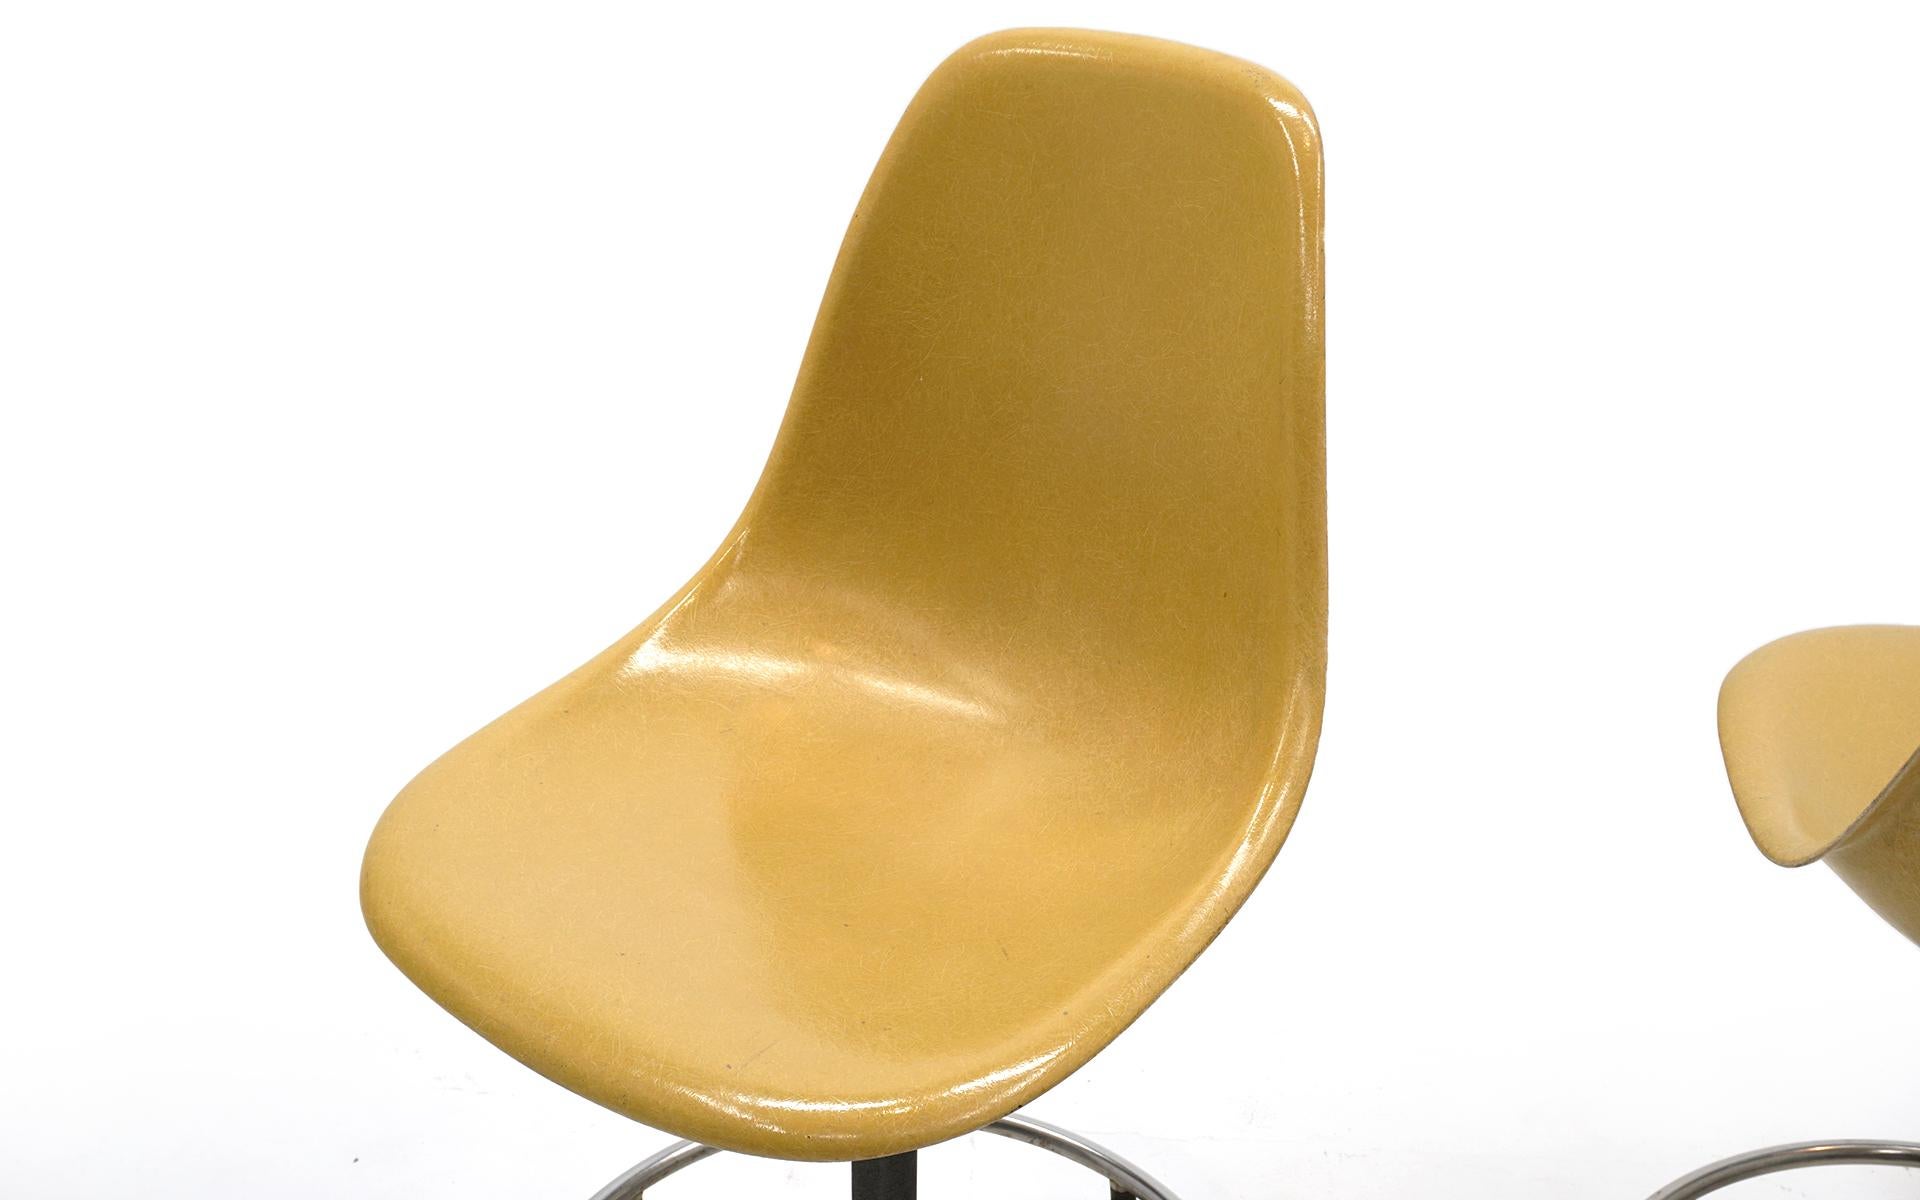 Mid-20th Century Pair of Yellow, Swivel Barstools / Drafting Stools by Charles and Ray Eames For Sale